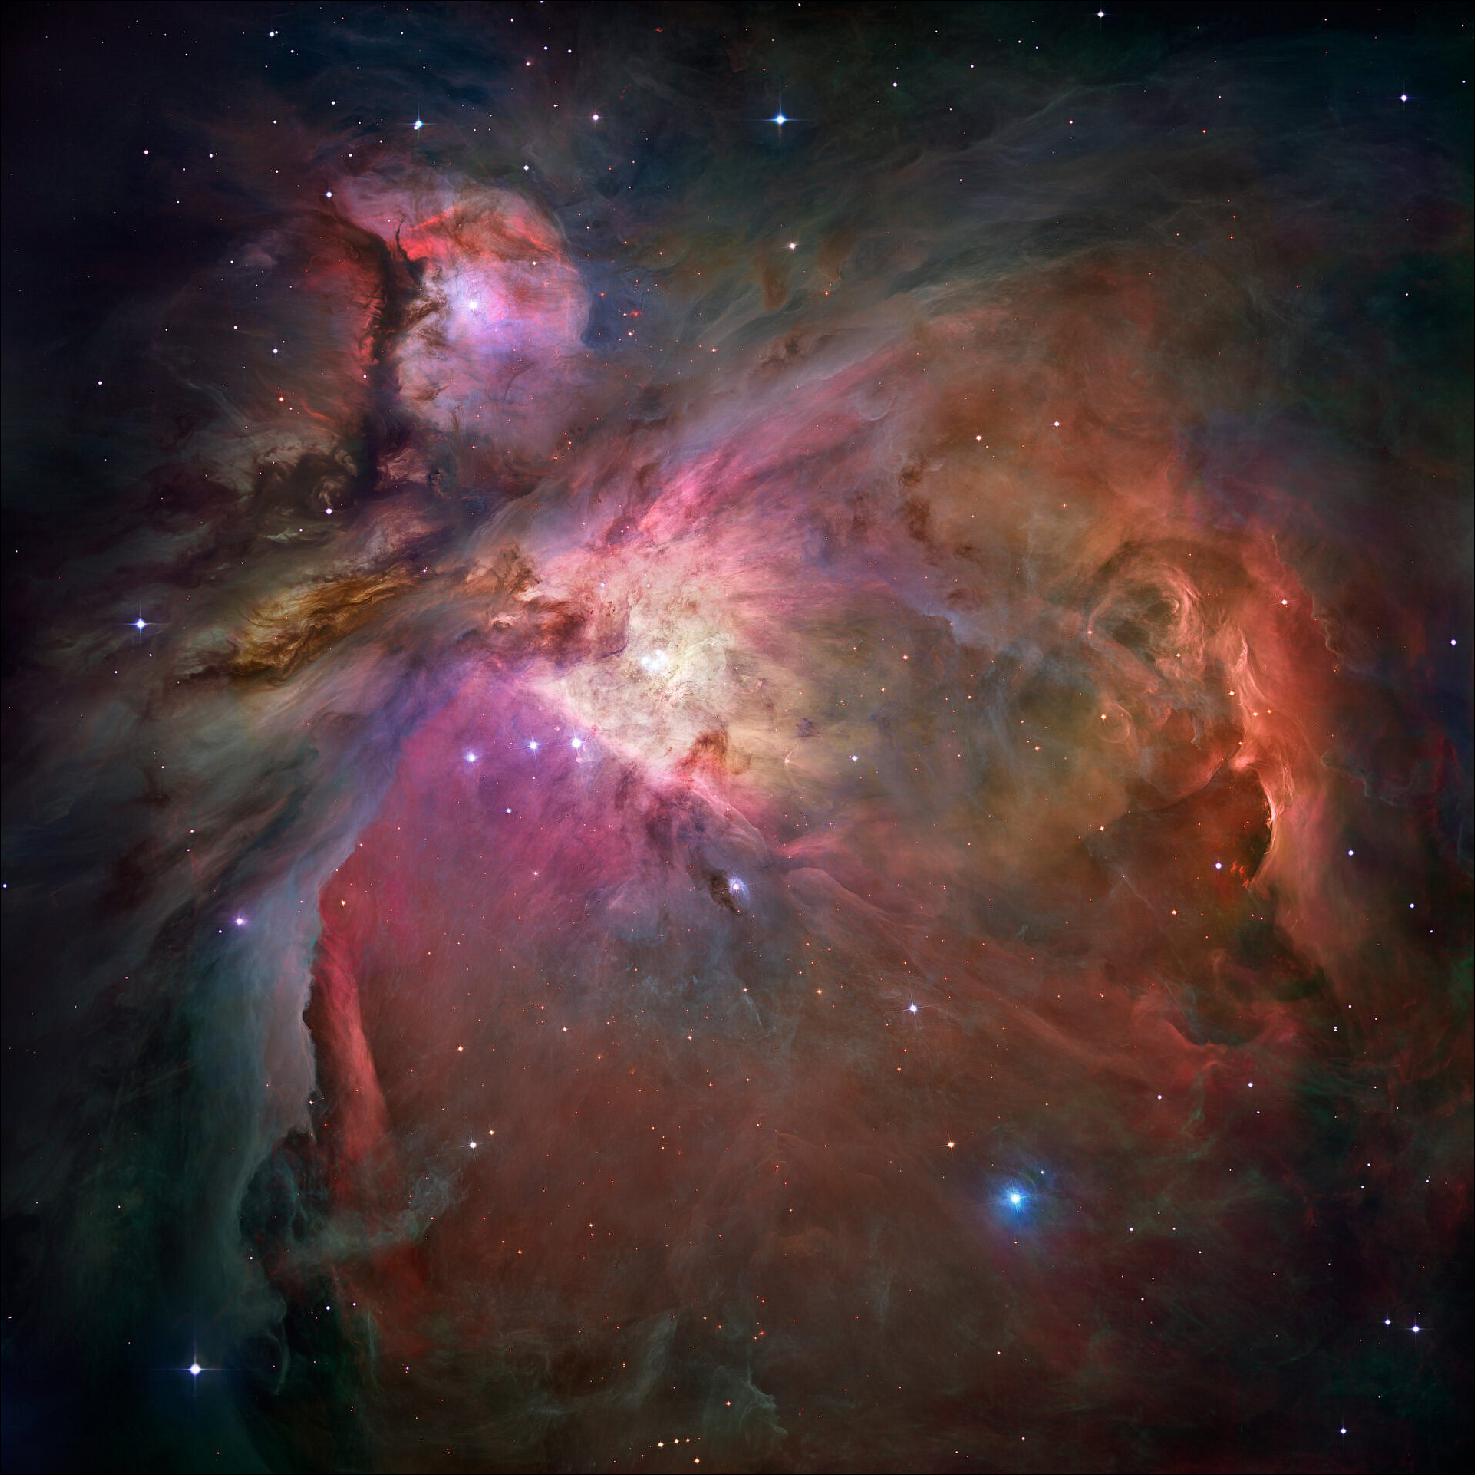 Figure 10: Hubble’s sharpest view of the Orion Nebula. This dramatic image offers a peek inside a 'cavern' of dust and gas where thousands of stars are forming. The image, taken by the Advanced Camera for Surveys (ACS) aboard NASA's Hubble Space Telescope, represents the sharpest view ever taken of this region, called the Orion Nebula. More than 3000 stars of various sizes appear in this image. Some of them have never been seen in visible light. - The Orion Nebula is 1500 light-years away, the nearest star-forming region to Earth. Astronomers used 520 Hubble images, taken in five colors, to make this picture. They also added ground-based photos to fill out the nebula. The ACS mosaic covers approximately the apparent angular size of the full Moon. These observations were taken between 2004 and 2005 (image credit: NASA, ESA, M. Robberto (Space Telescope Science Institute/ESA) and the Hubble Space Telescope Orion Treasury Project Team)